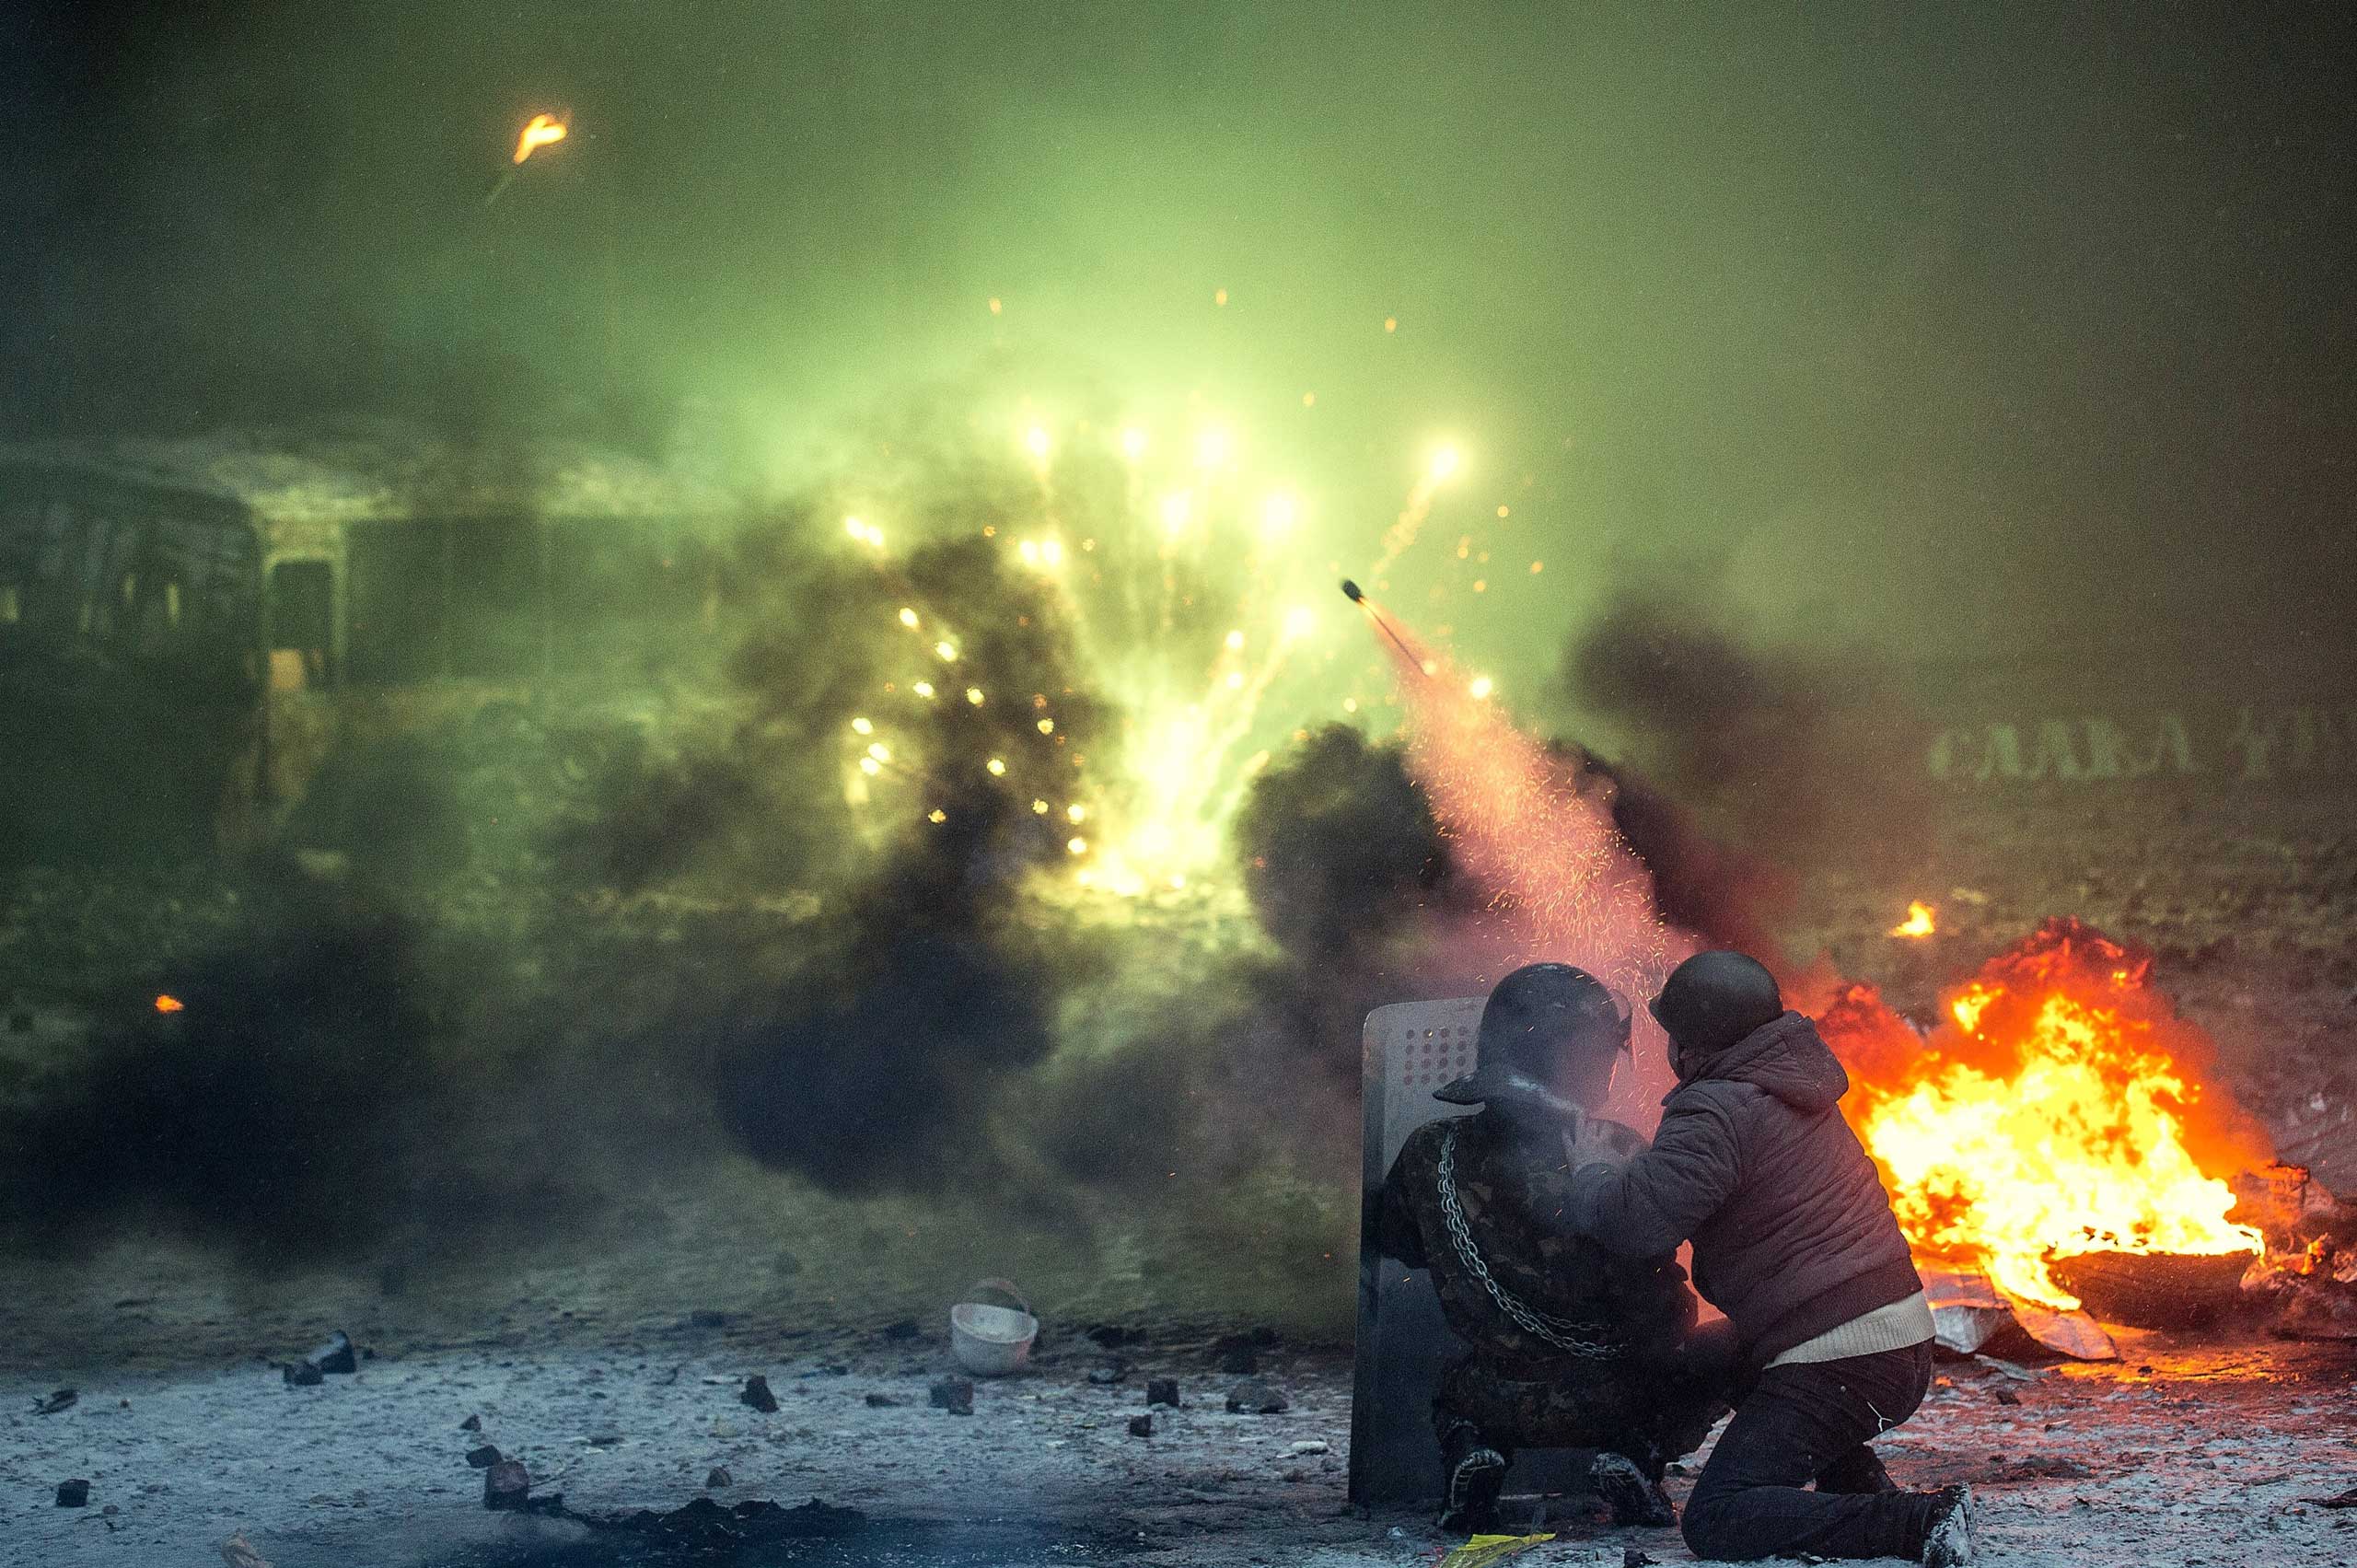 Ukrainian protesters shoot with a help of petards amongst burning automobile tires during a mass action of opposition on Grushevsky street against laws recently accepted by the Verkhovna Rada that toughen requirements to carrying out mass meetings and restrict journalists activity, on Jan. 22, 2014 in Kiev, Ukraine.